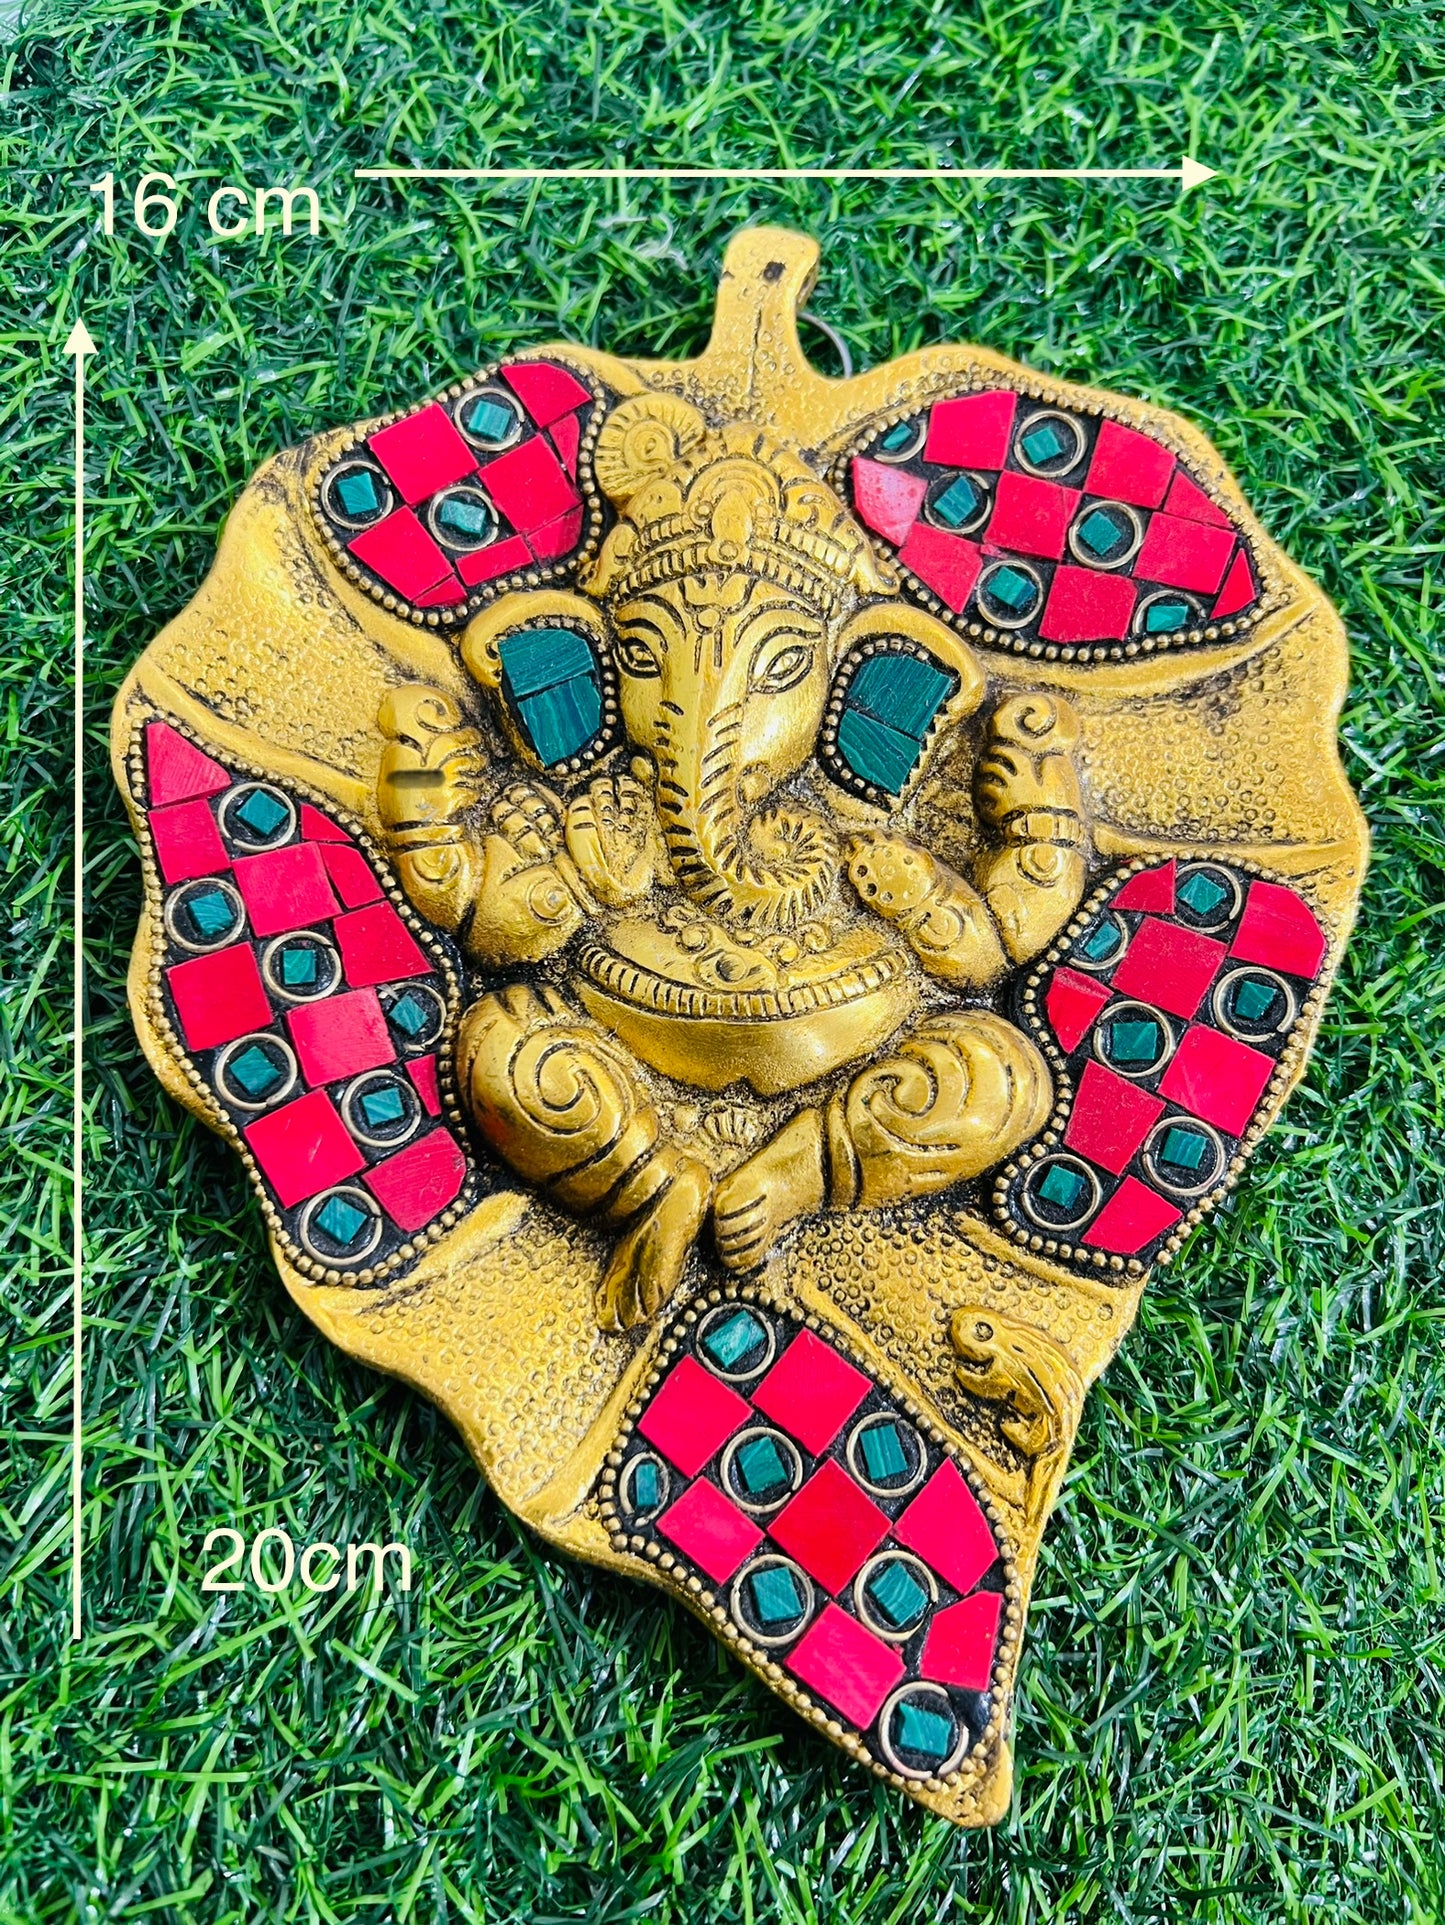 CHANDNI COLLECTION Golden Metal Lord Ganesha in Red & in Green Leaf Wall Hanging Decorative showpiece for Home decor, Wall Decor, Pooja Room Temple & Housewarming, Festival Gift